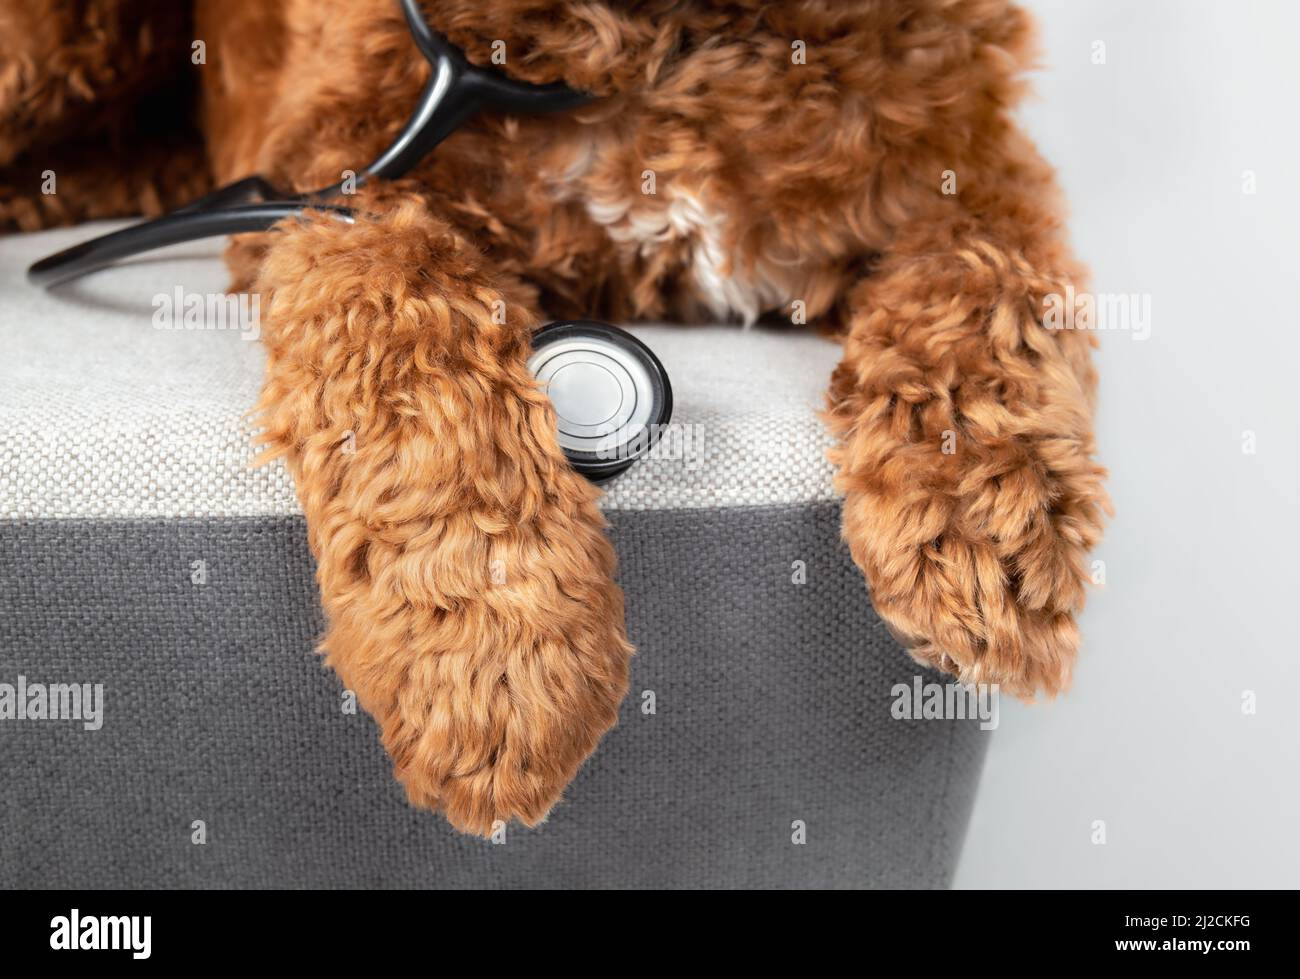 Large dog with stethoscope, close up. Brown, orange or apricot Labradoodle dog on a chair with dangling paws. Funny concept for veterinary, animal hos Stock Photo